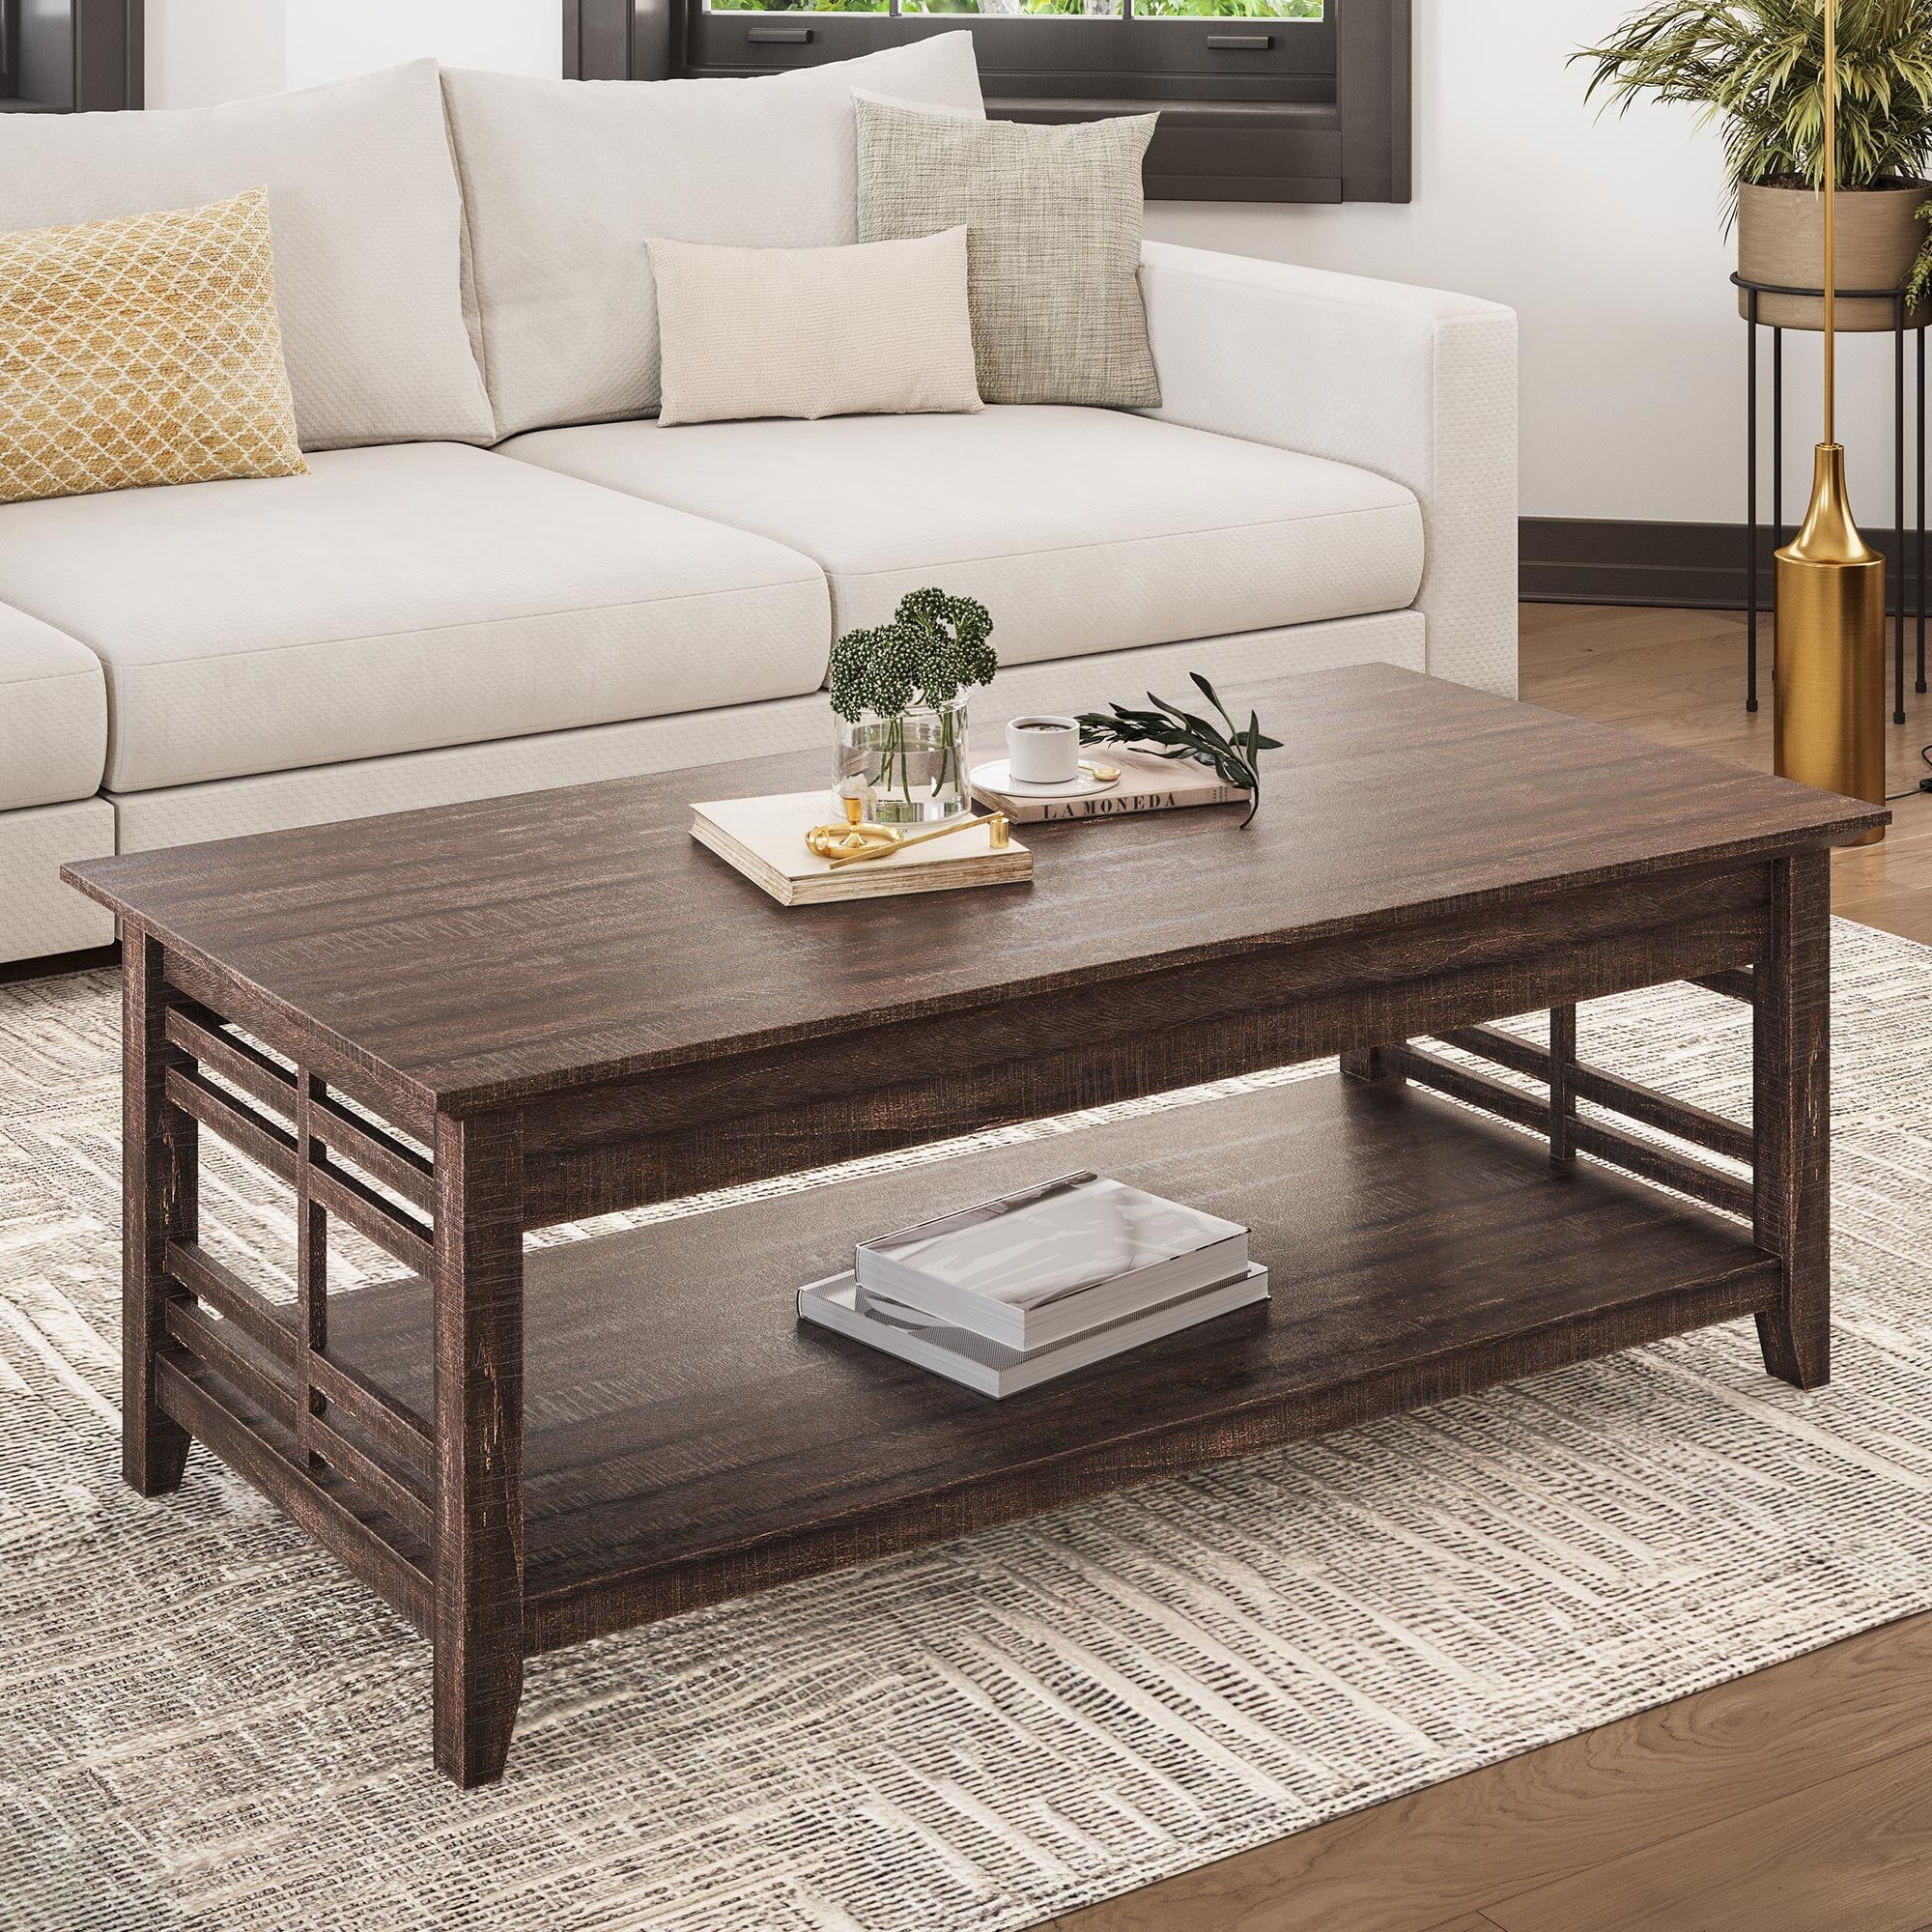 Belleze Modern Wood Coffee Table With Storage Shelf Two Tier Rectangular  Stylish Decor For Living Room Conversation Leisure Occasions – Norrell  (espresso) – Walmart Within Wood Coffee Tables With 2 Tier Storage (View 15 of 15)